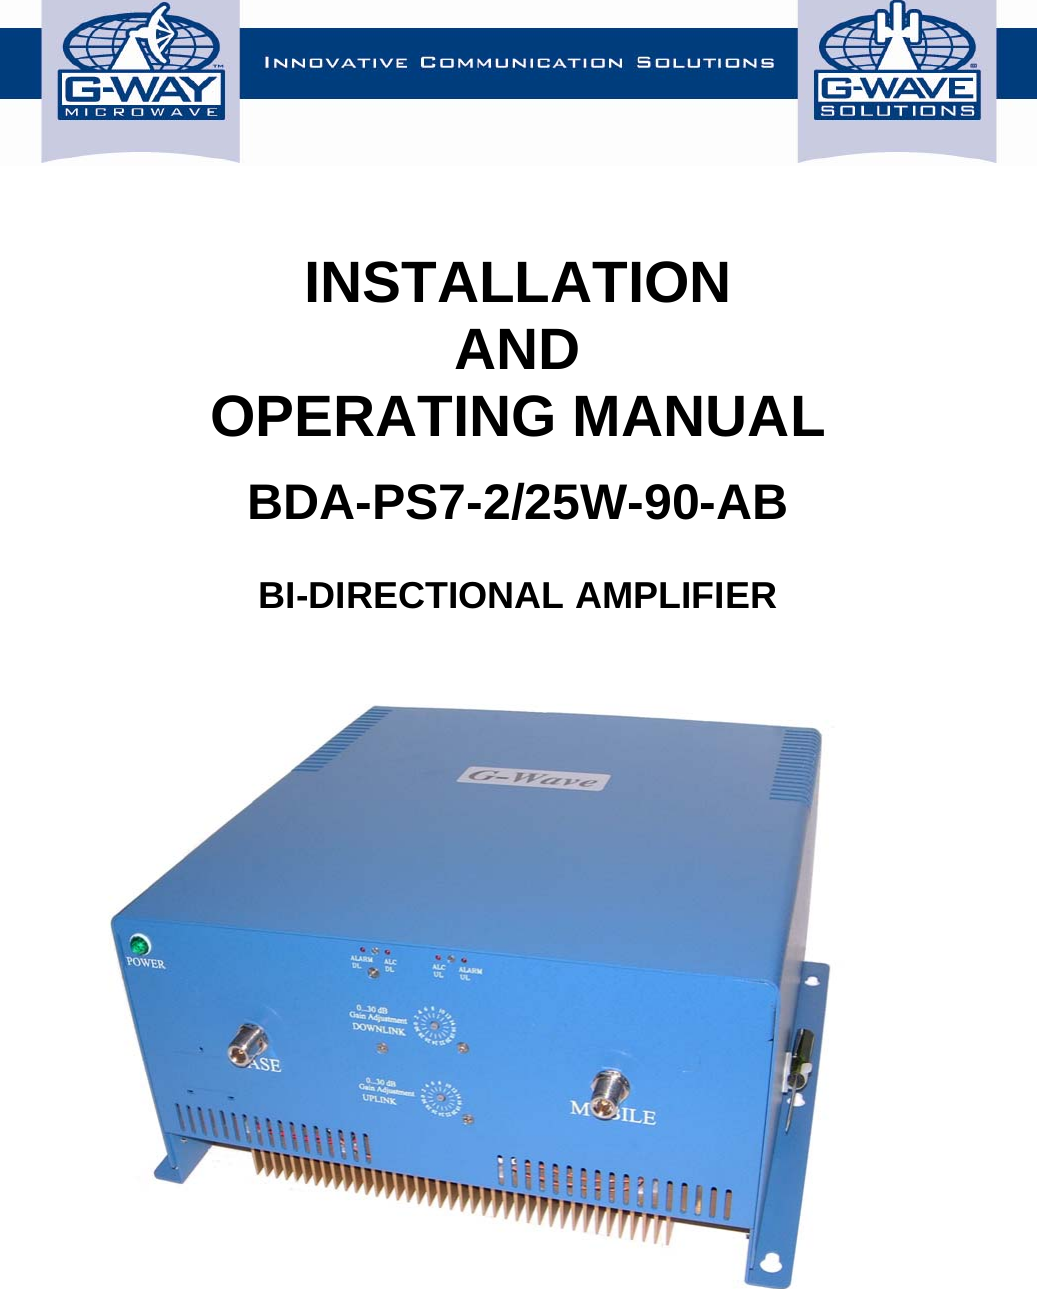     INSTALLATION AND OPERATING MANUAL  BDA-PS7-2/25W-90-AB  BI-DIRECTIONAL AMPLIFIER     